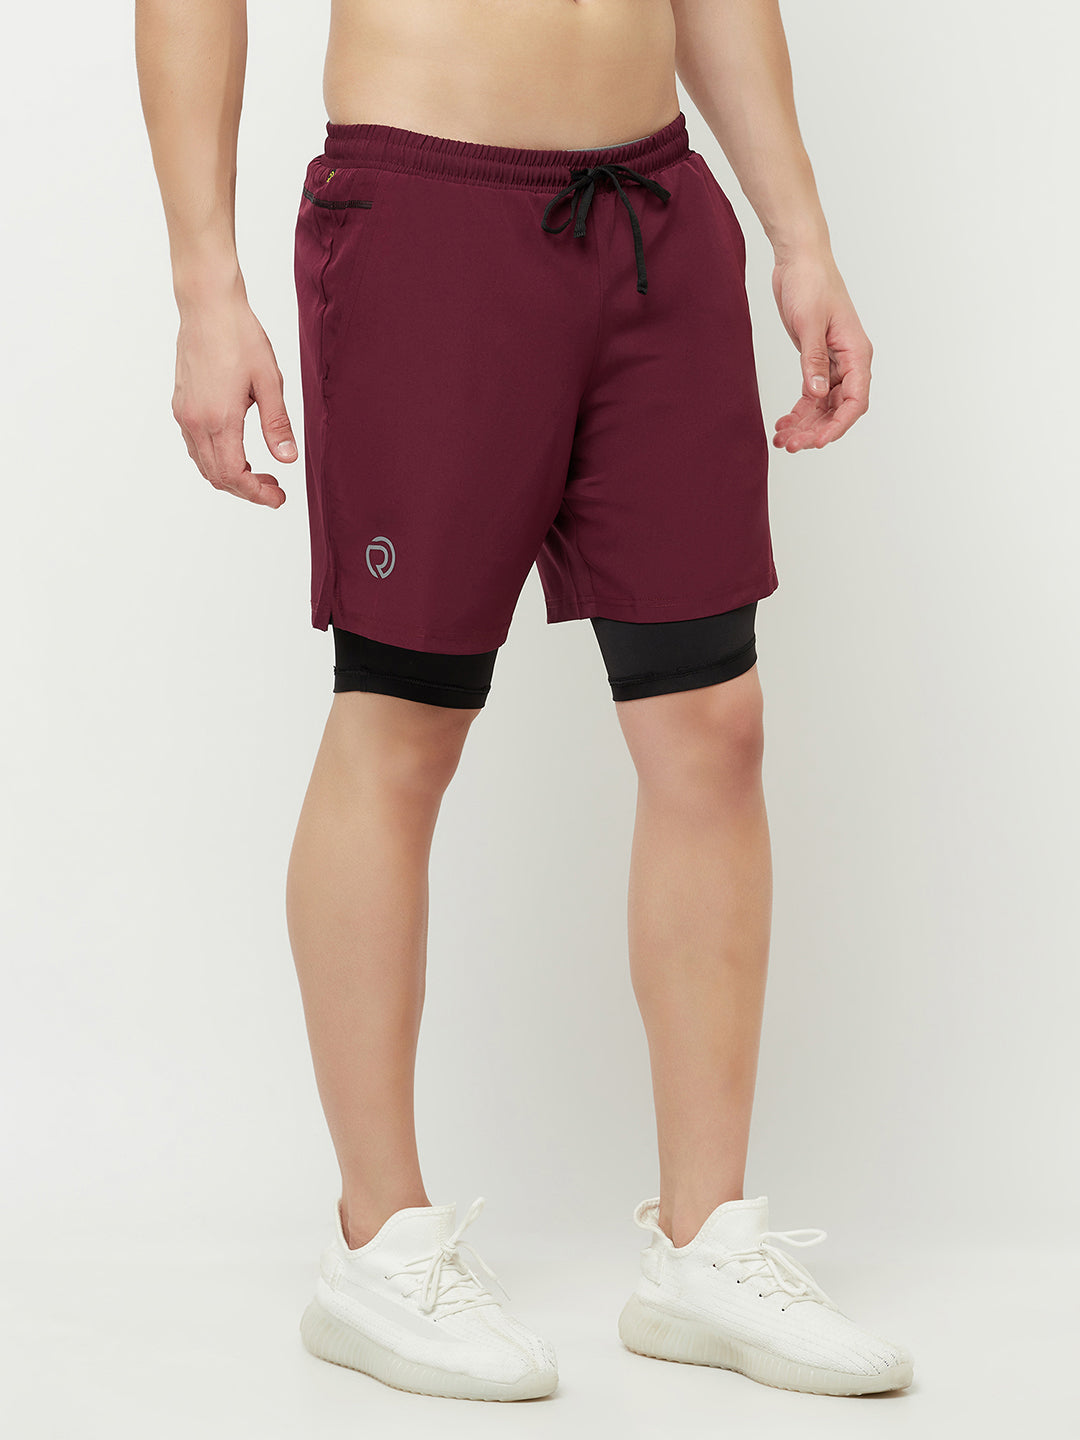 2 pc Combo - 7" 2-in-1 Shorts with Phone Pocket - Maroon & Sky Blue